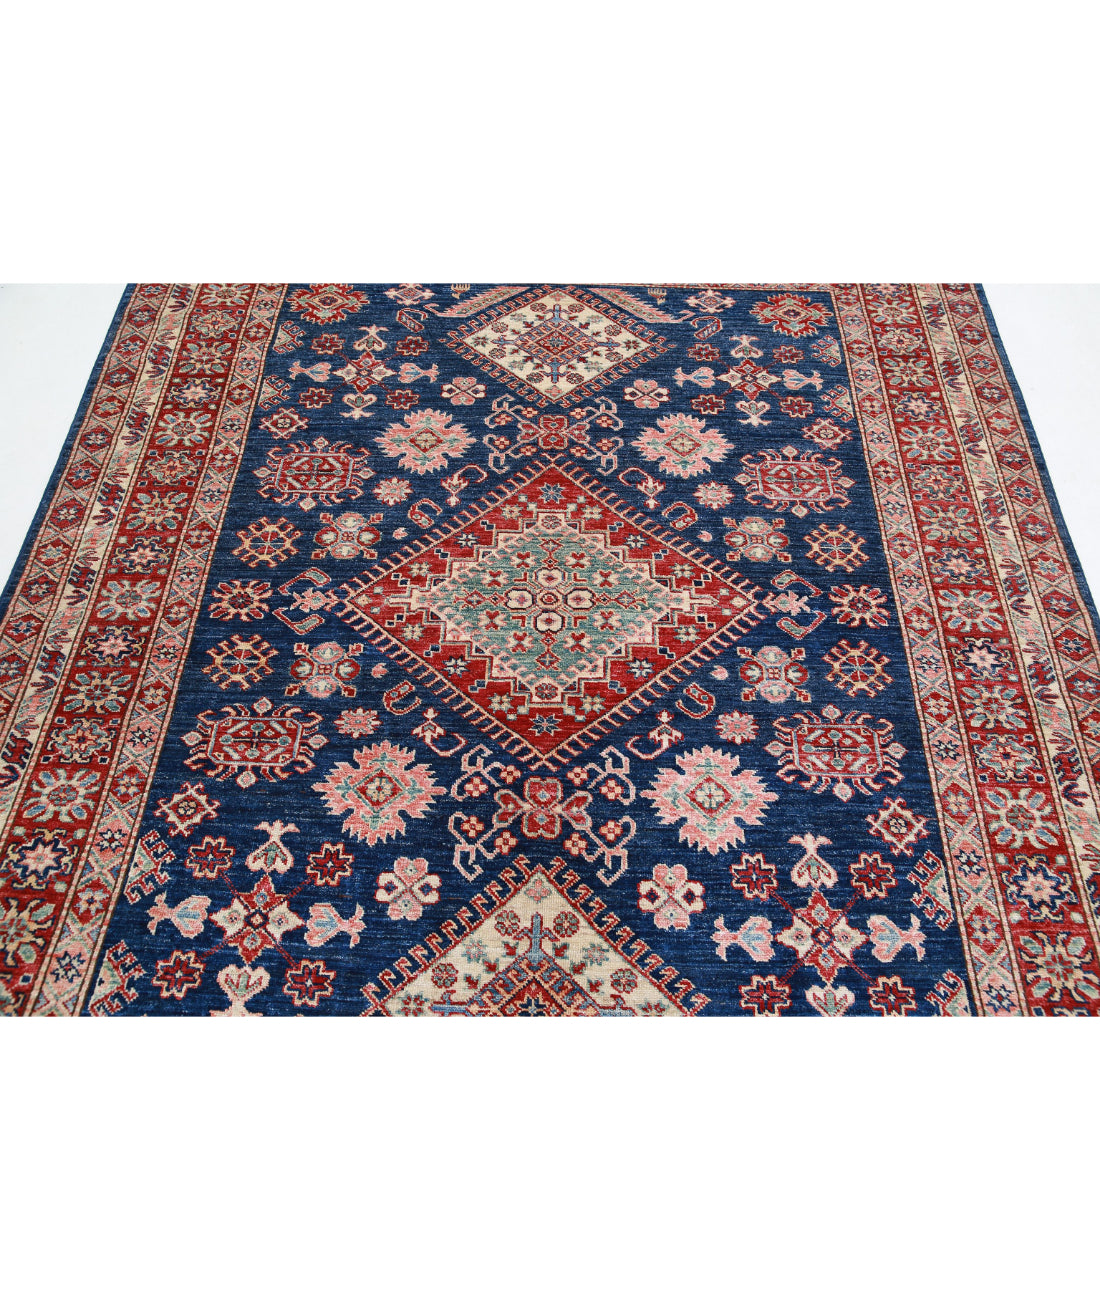 Hand Knotted Royal Kazak Wool Rug - 6'2'' x 7'6'' 6'2'' x 7'6'' (185 X 225) / Blue / Red